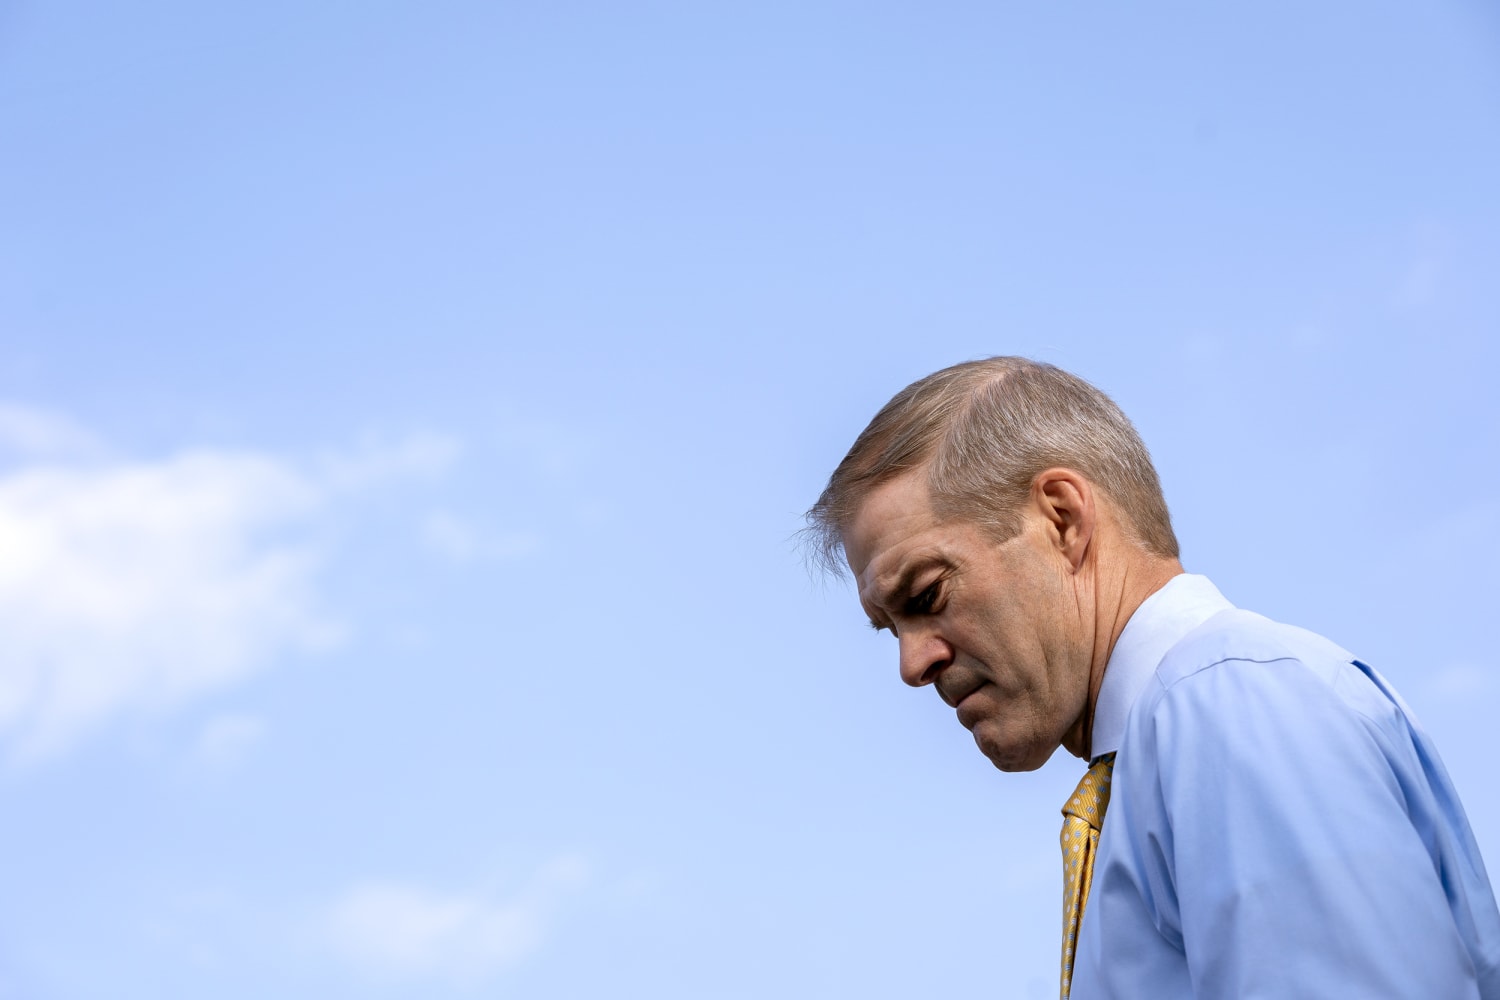 Rep. Jim Jordan, a close Trump ally, signals he won’t cooperate with Jan. 6 committee